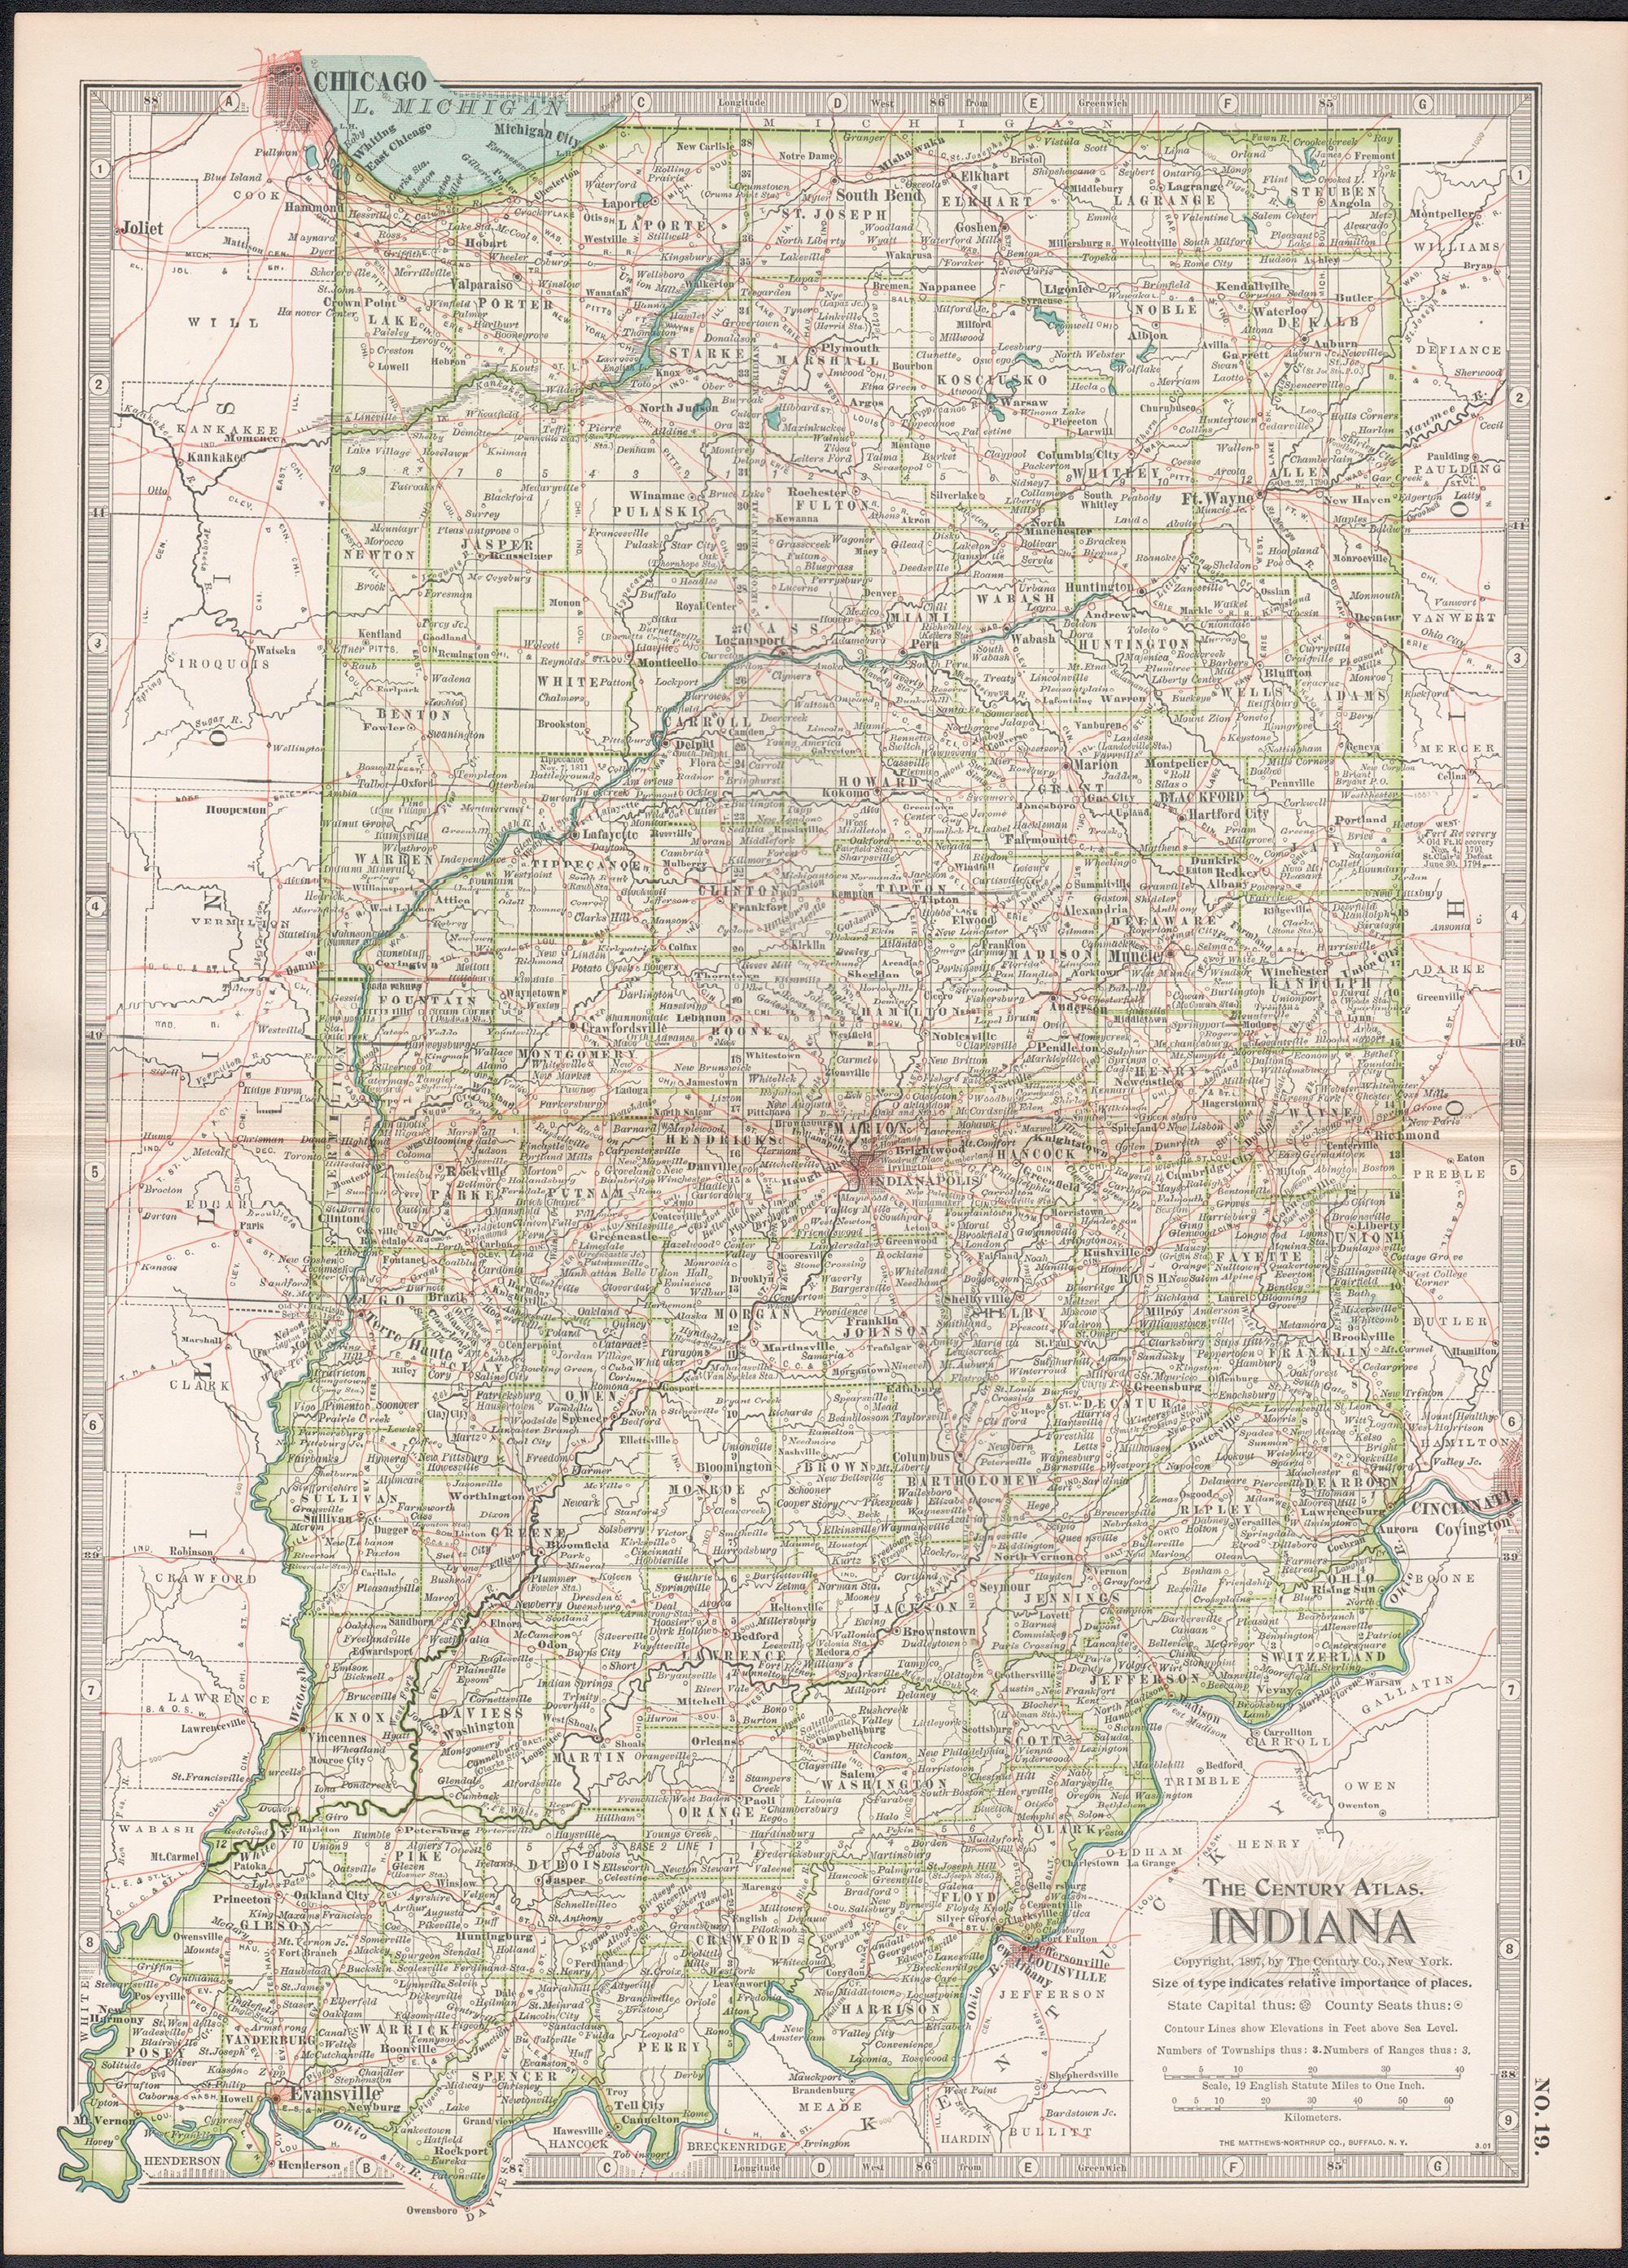 Indiana. USA. Century Atlas state antique vintage map - Print by Unknown